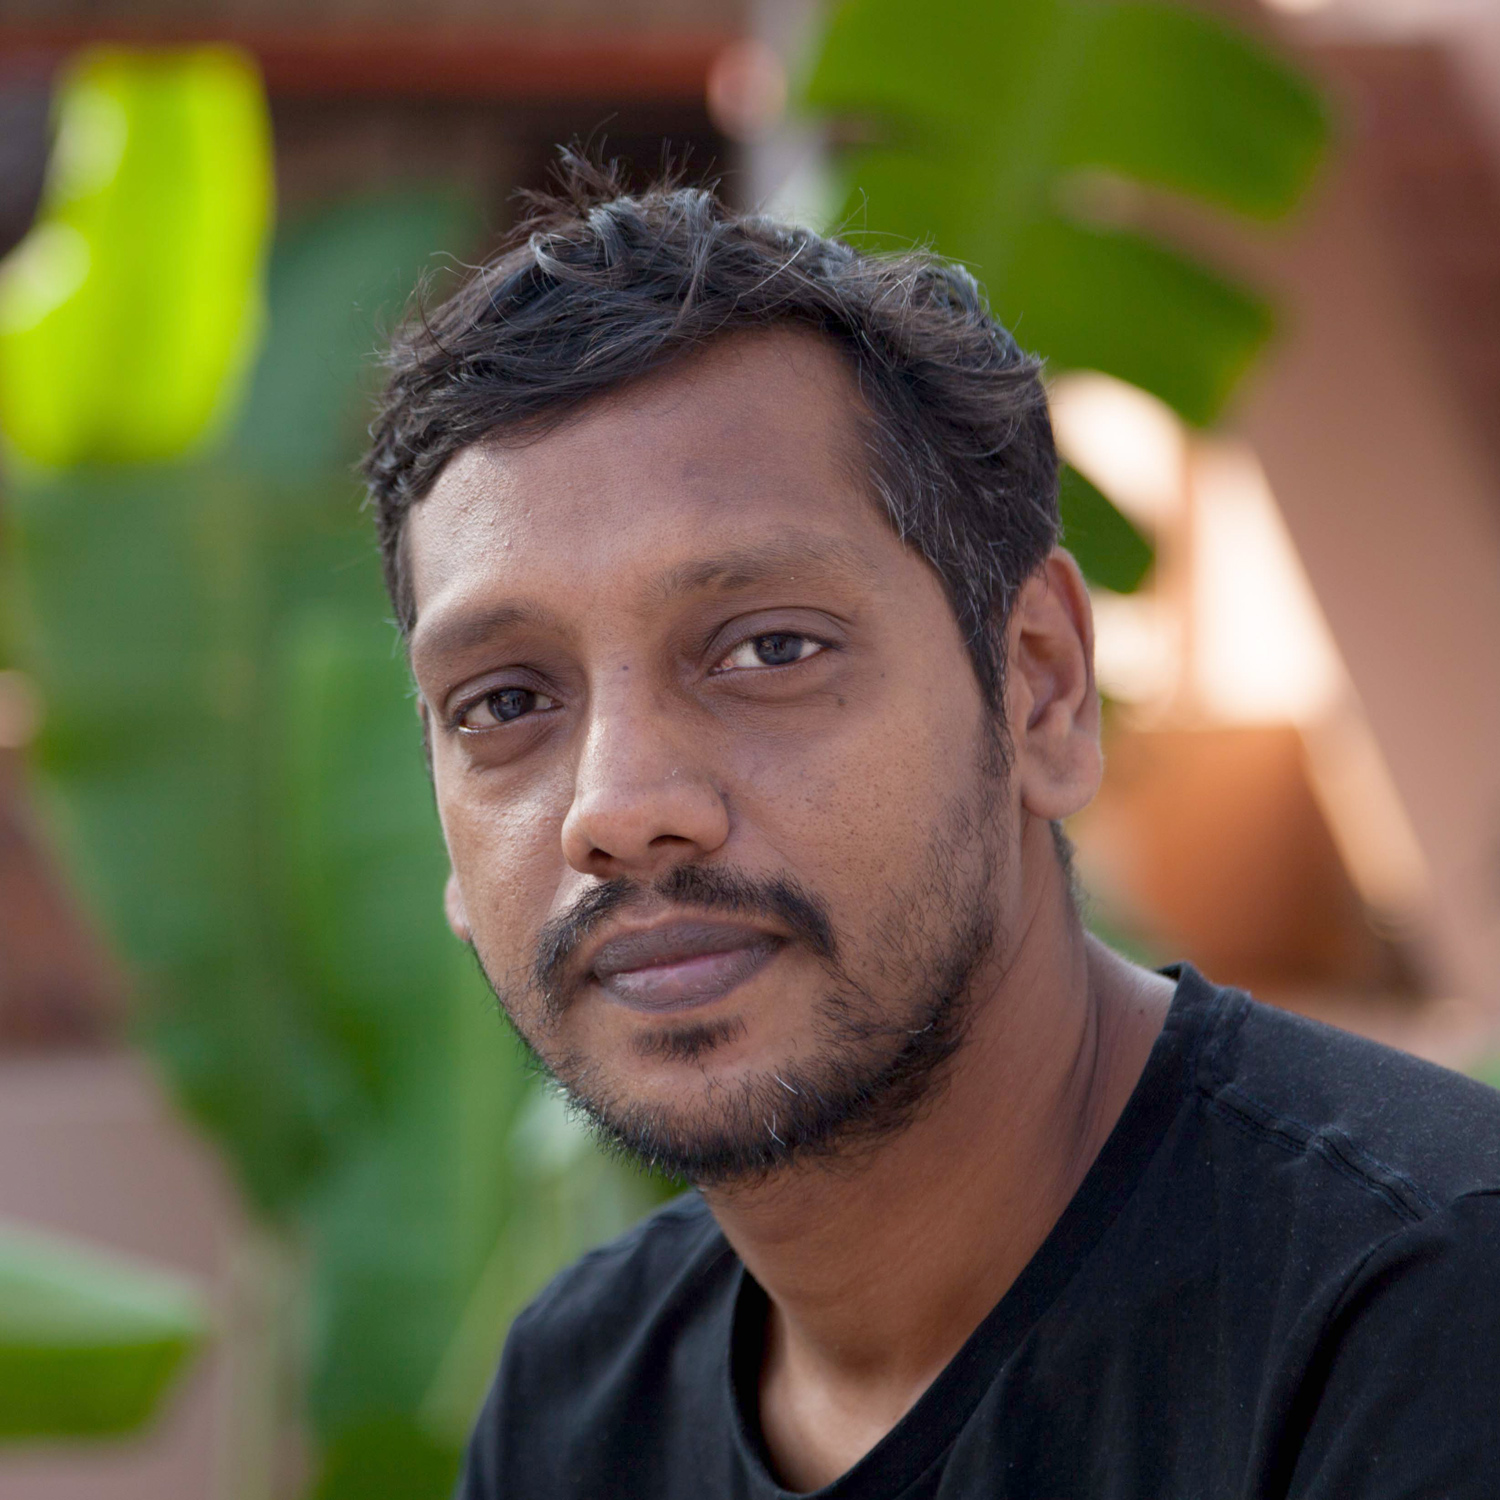 Thottoli, 38, is a freelance medical transcriptionist from Thiruvananthapuram. But social activism is where his heart is. 